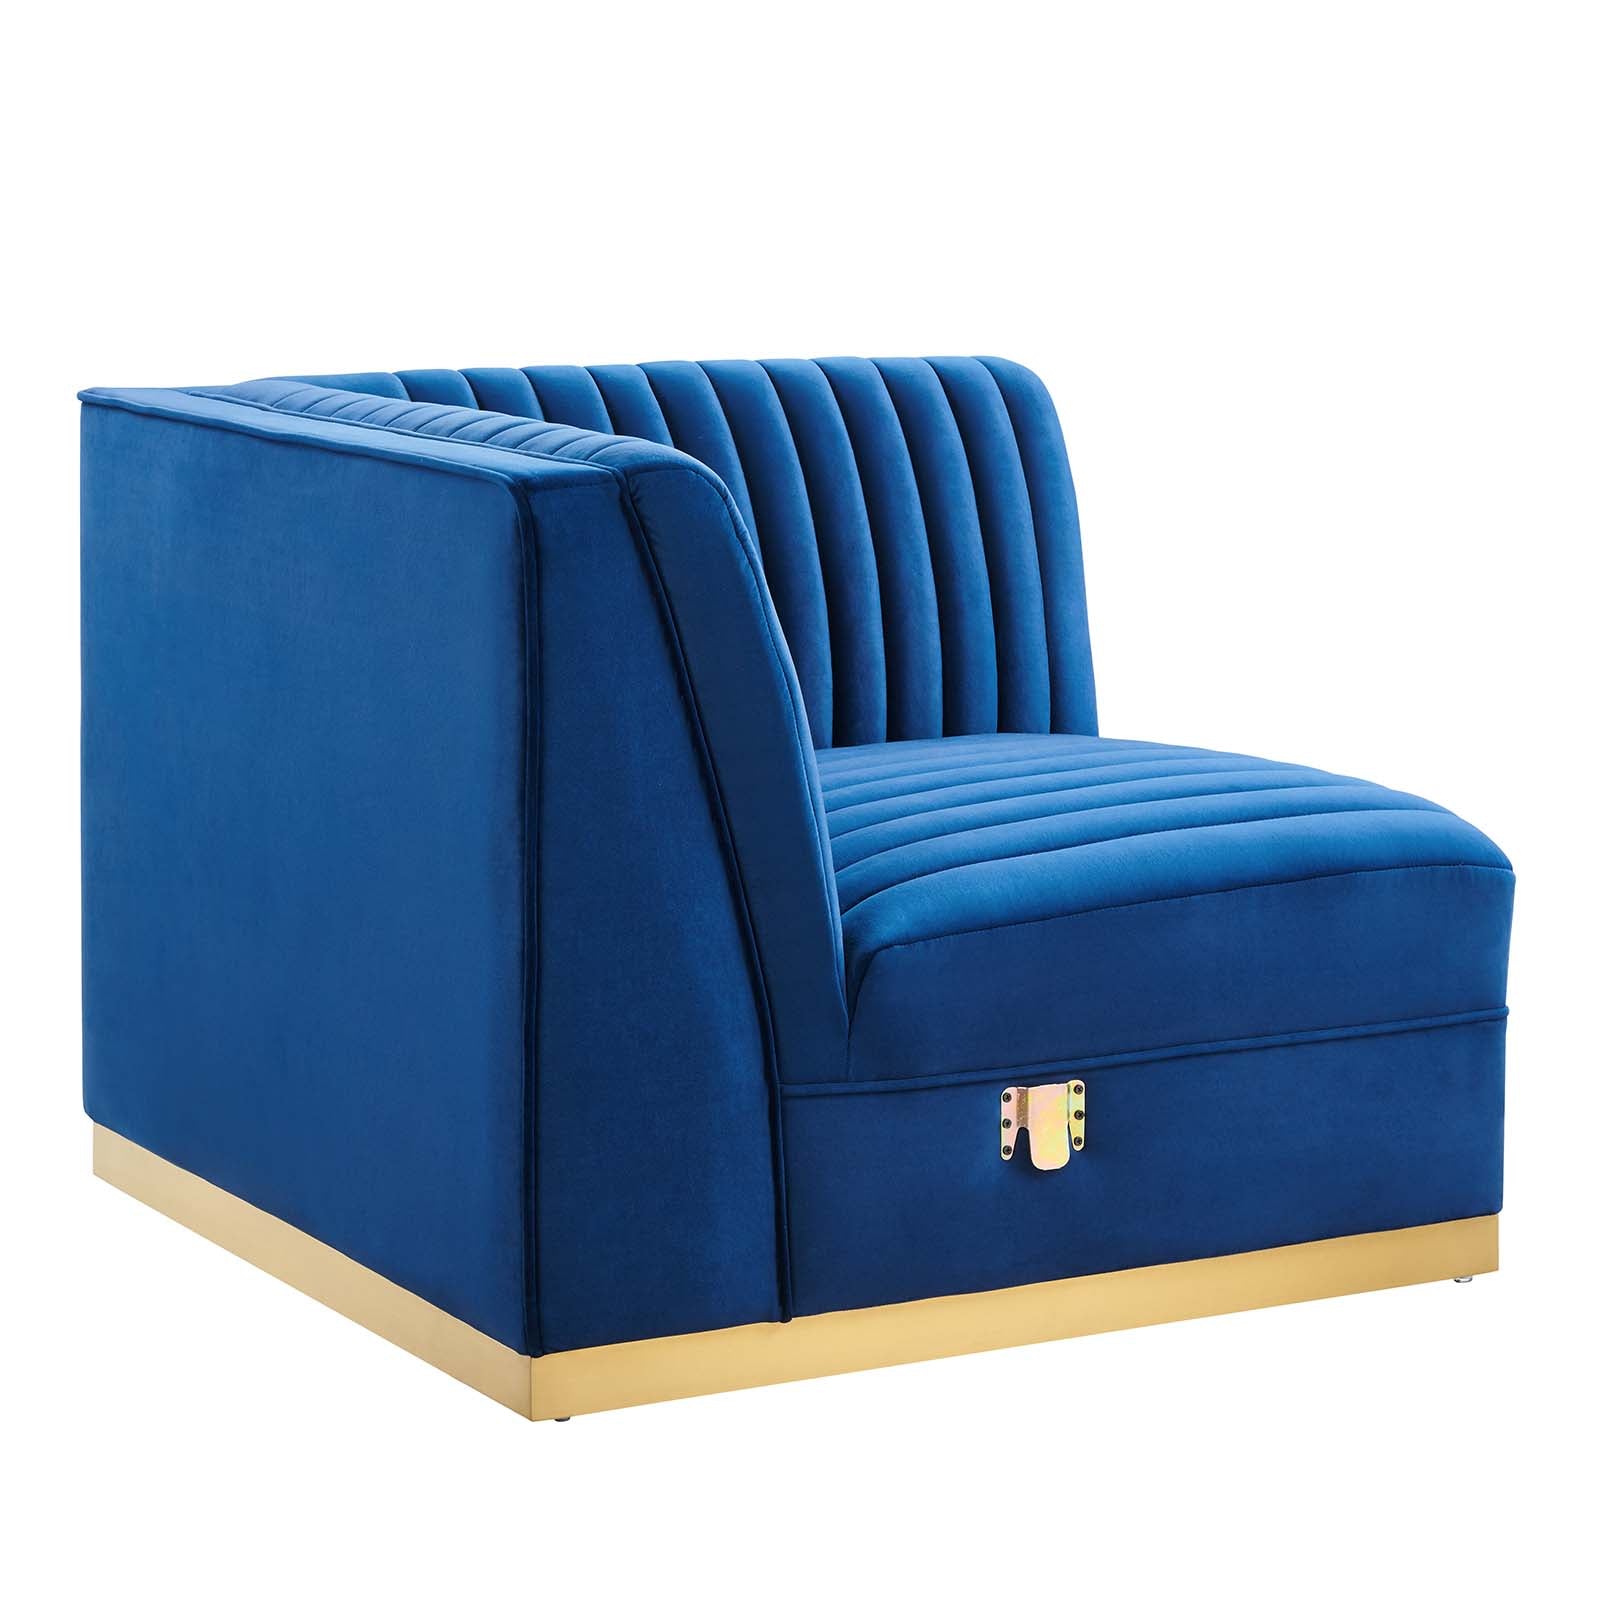 Modway Accent Chairs - Sanguine Channel Tufted Performance Velvet Modular Sectional Sofa Right Corner Chair Navy Blue